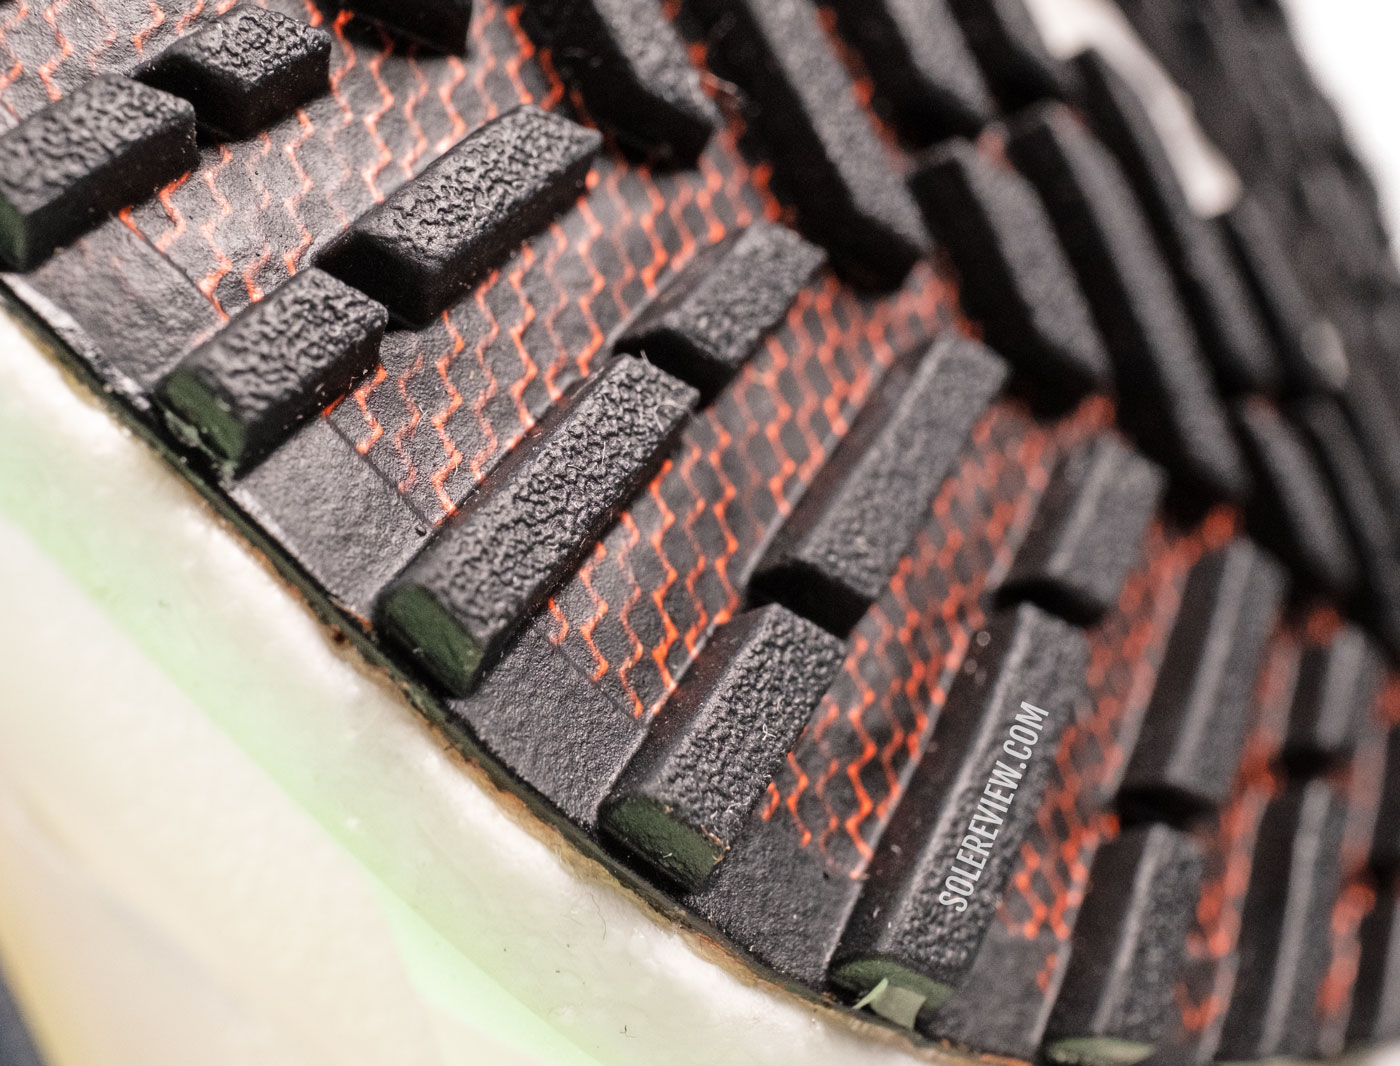 The outsole lugs of the adidas Ultraboost 22 Gore-Tex.